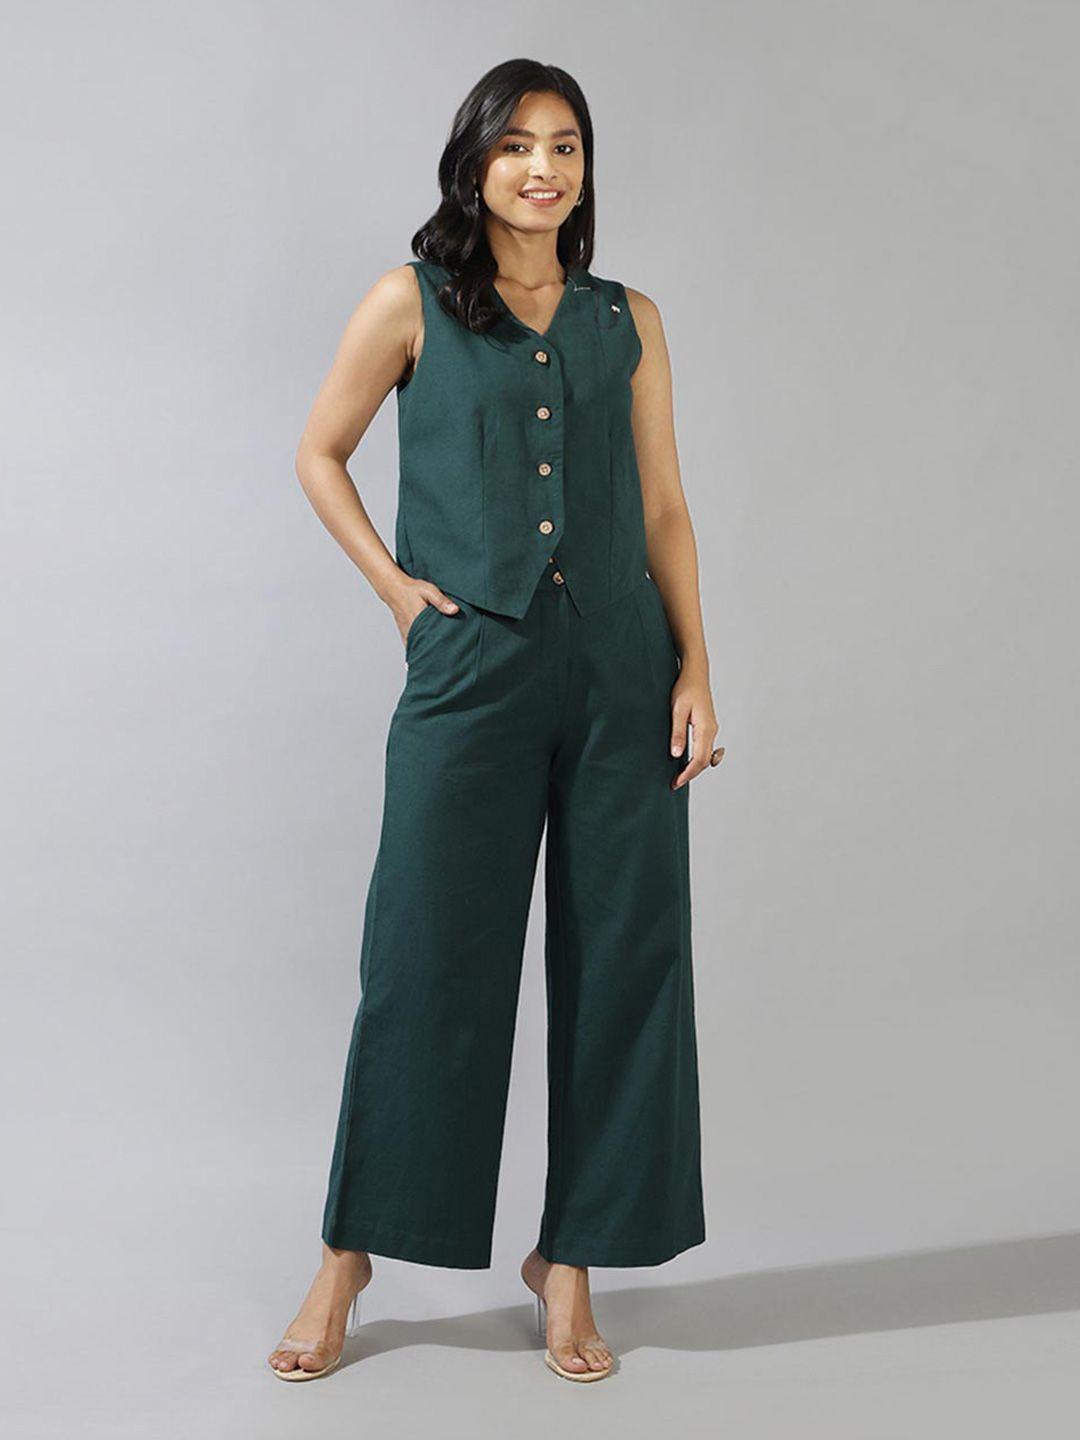 fabindia v-neck sleeveless cotton linen shirt style top with trousers